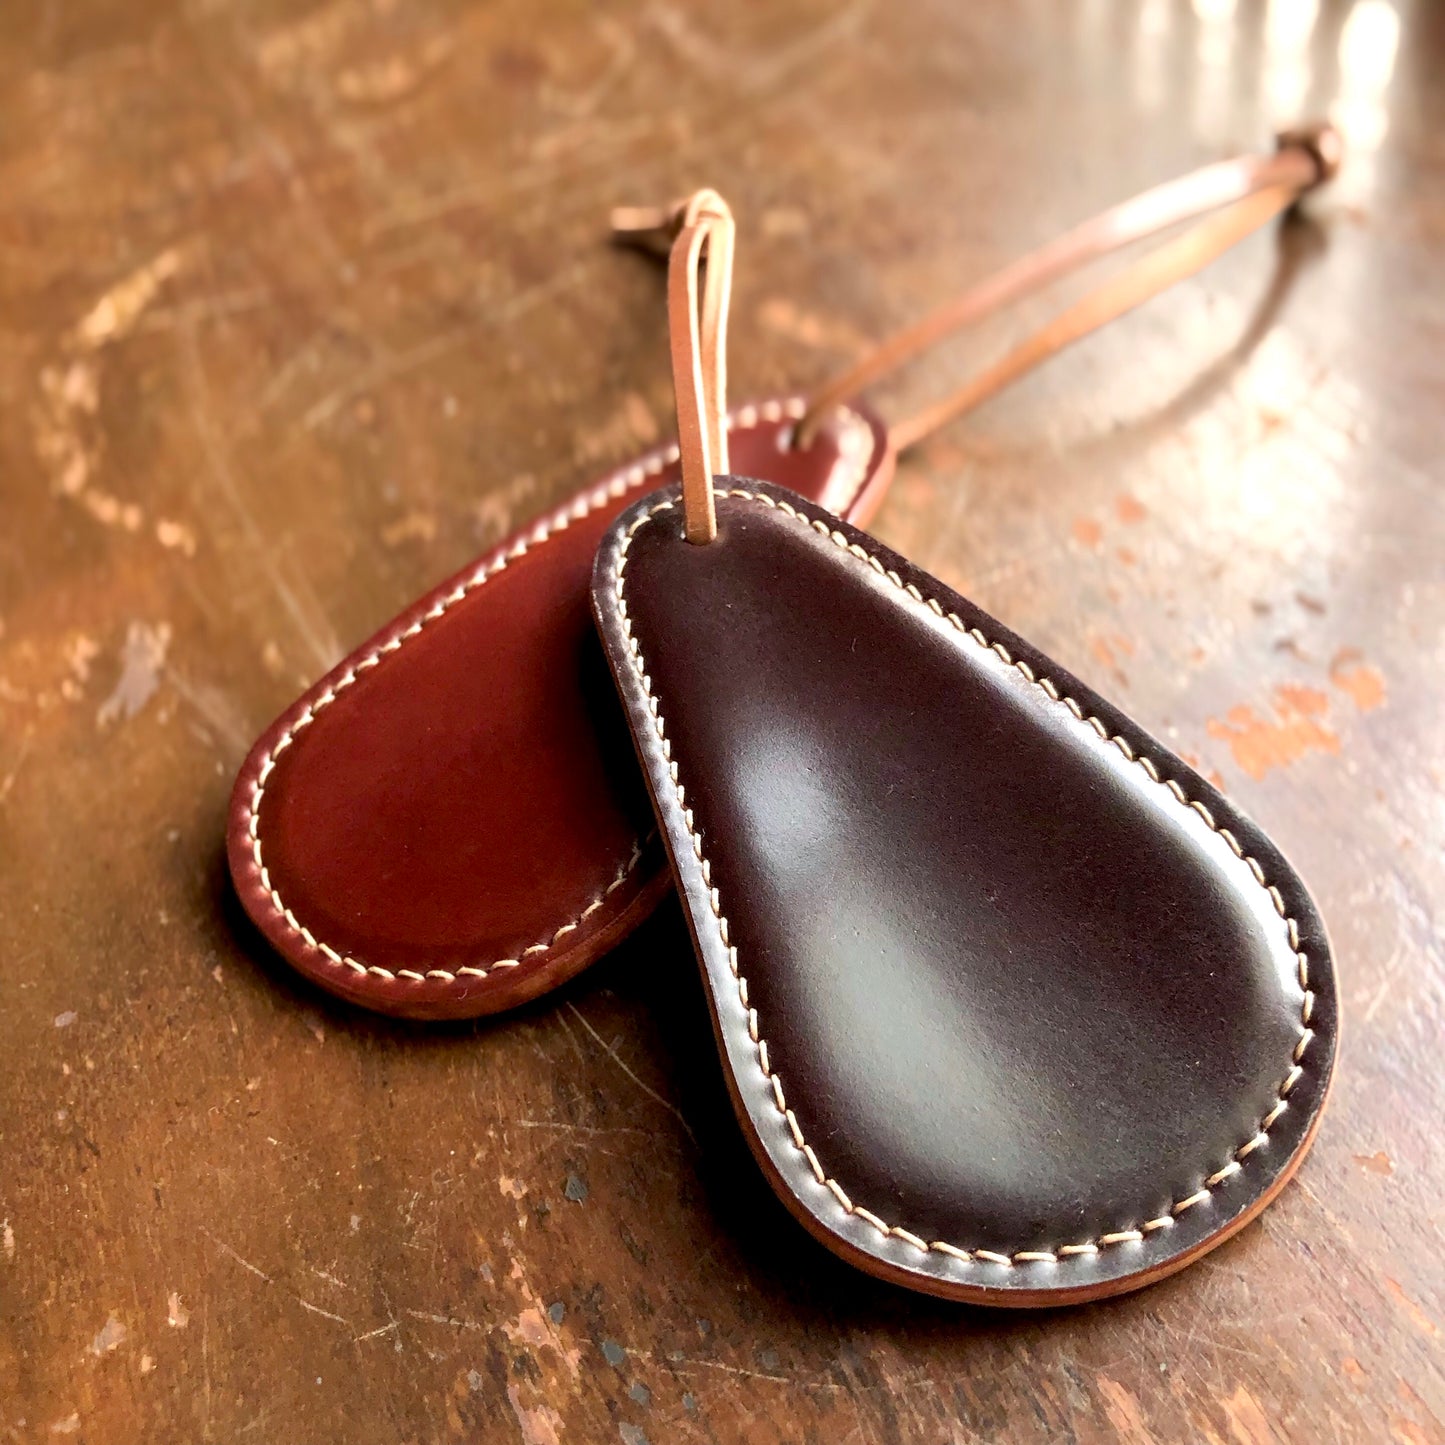 Shell Shoehorn【Horween】シェルコードバンの靴べら